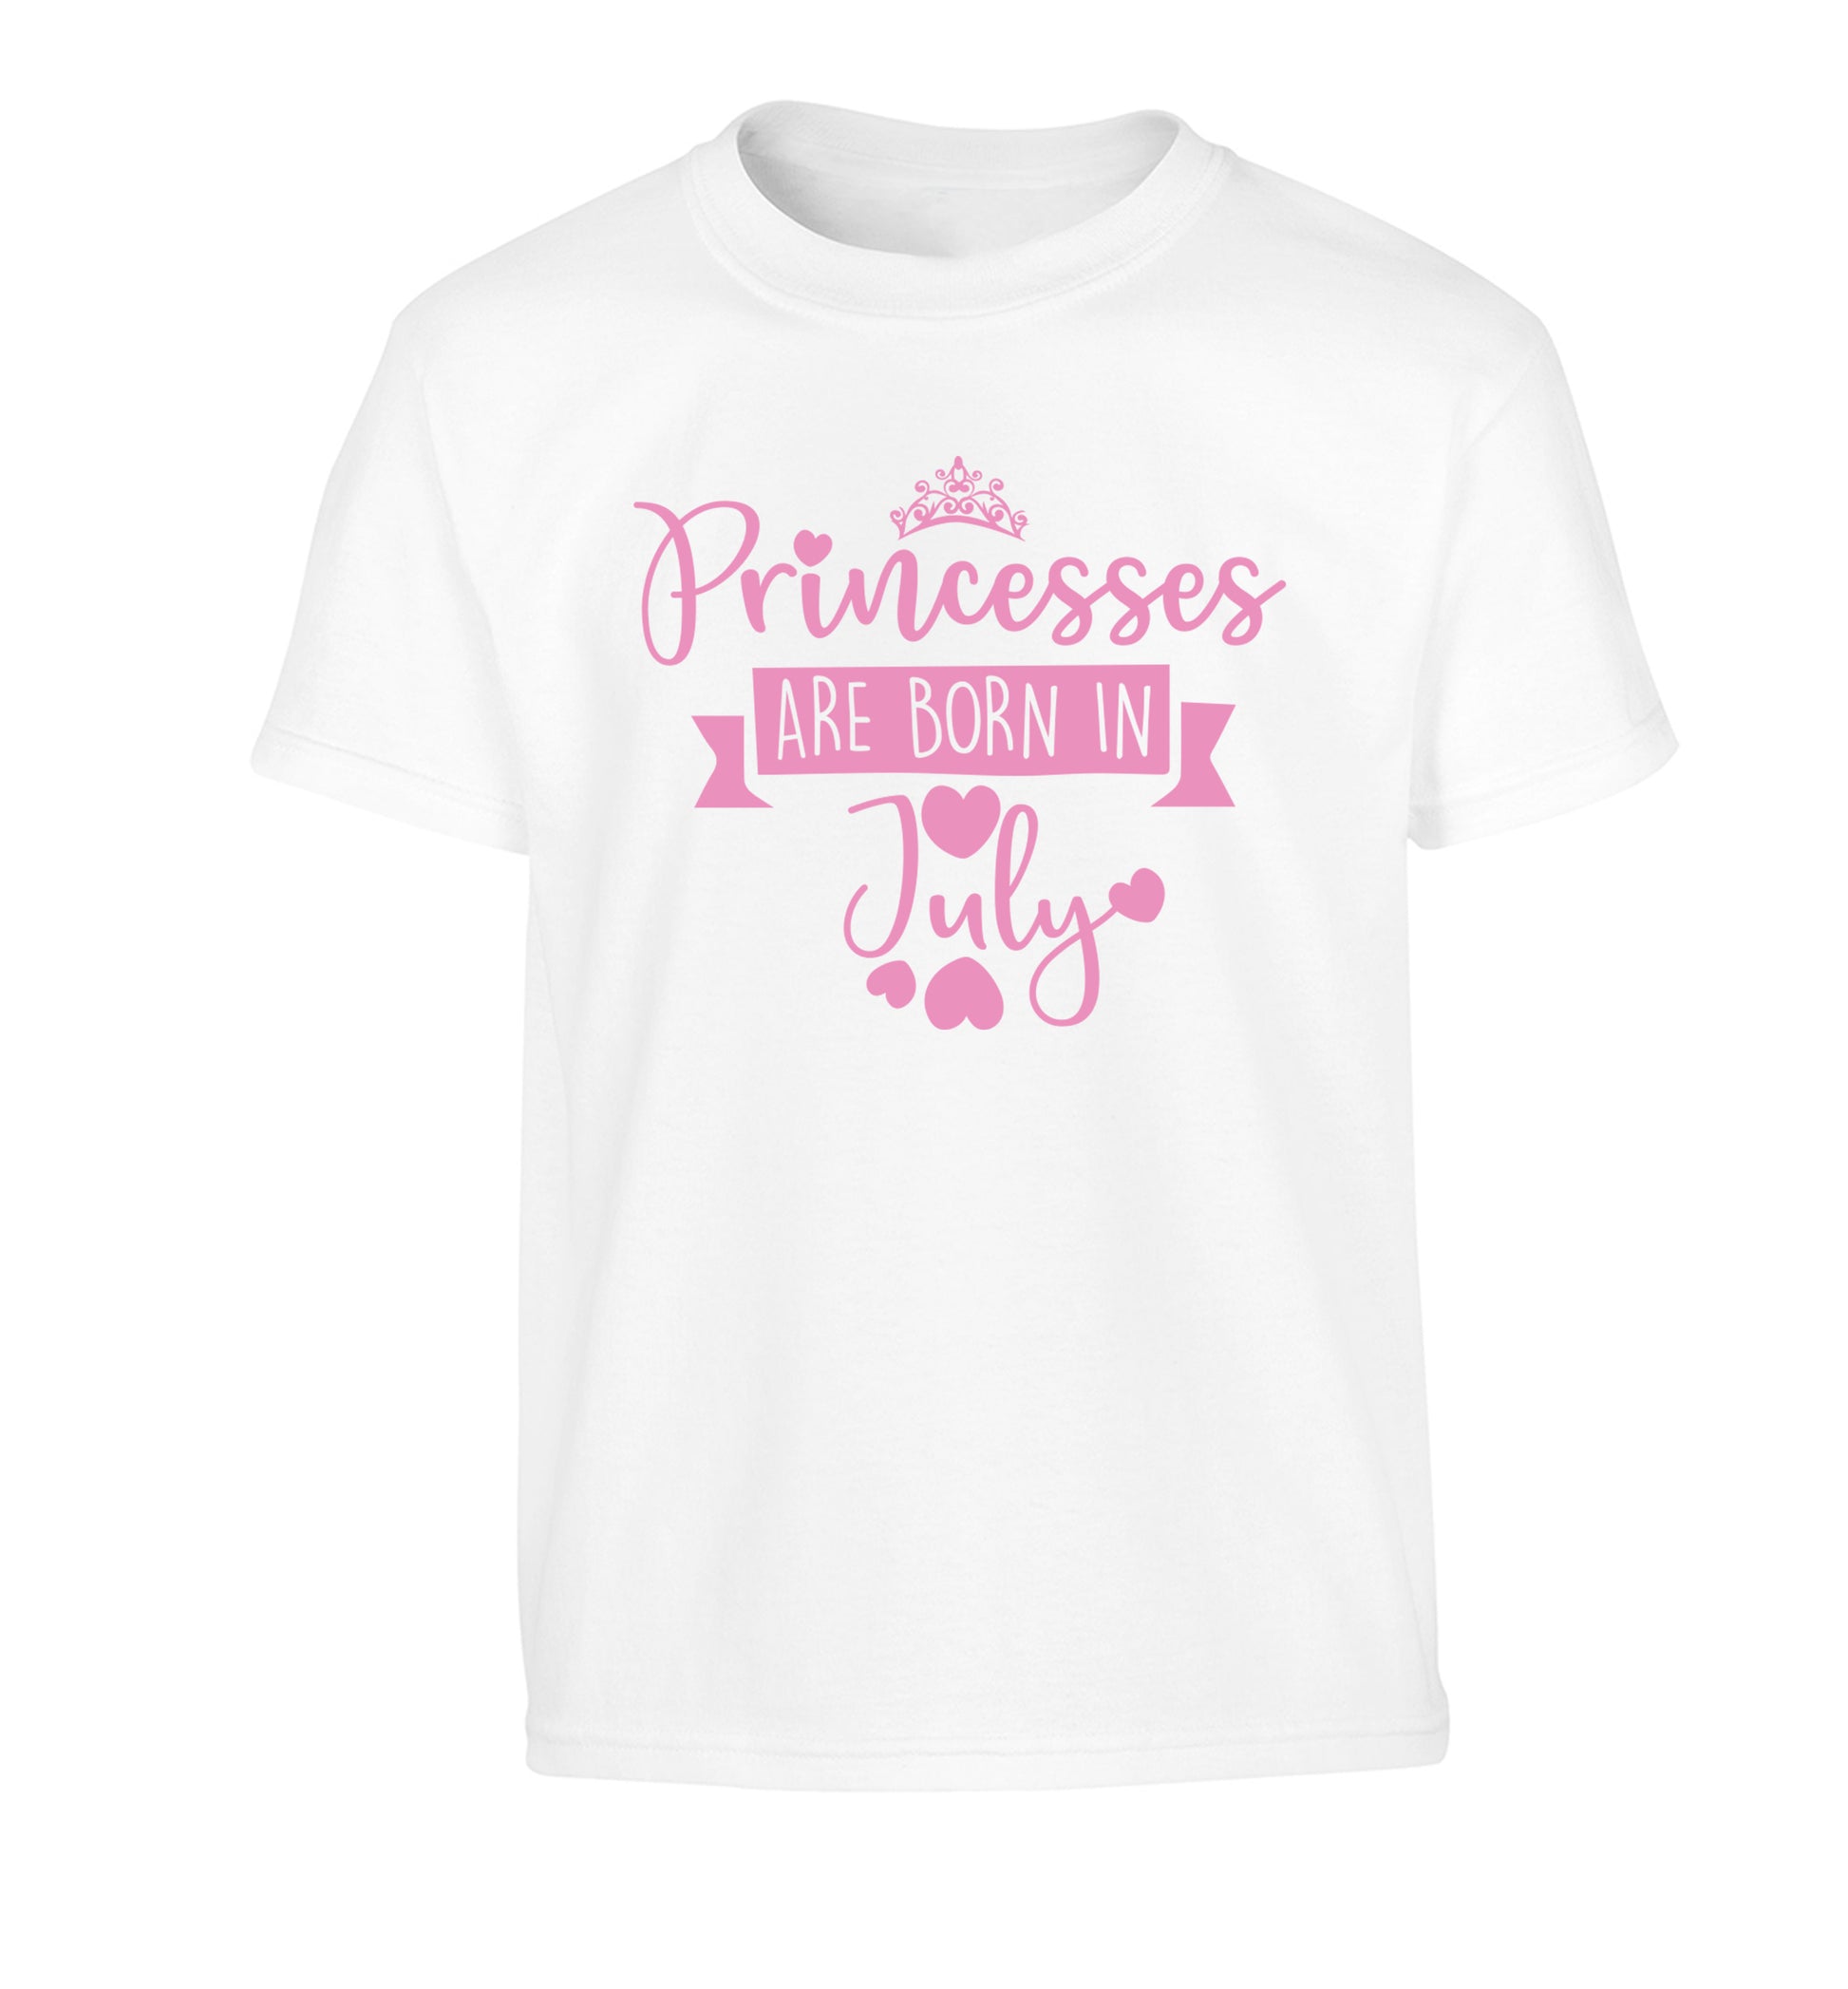 Princesses are born in July Children's white Tshirt 12-13 Years